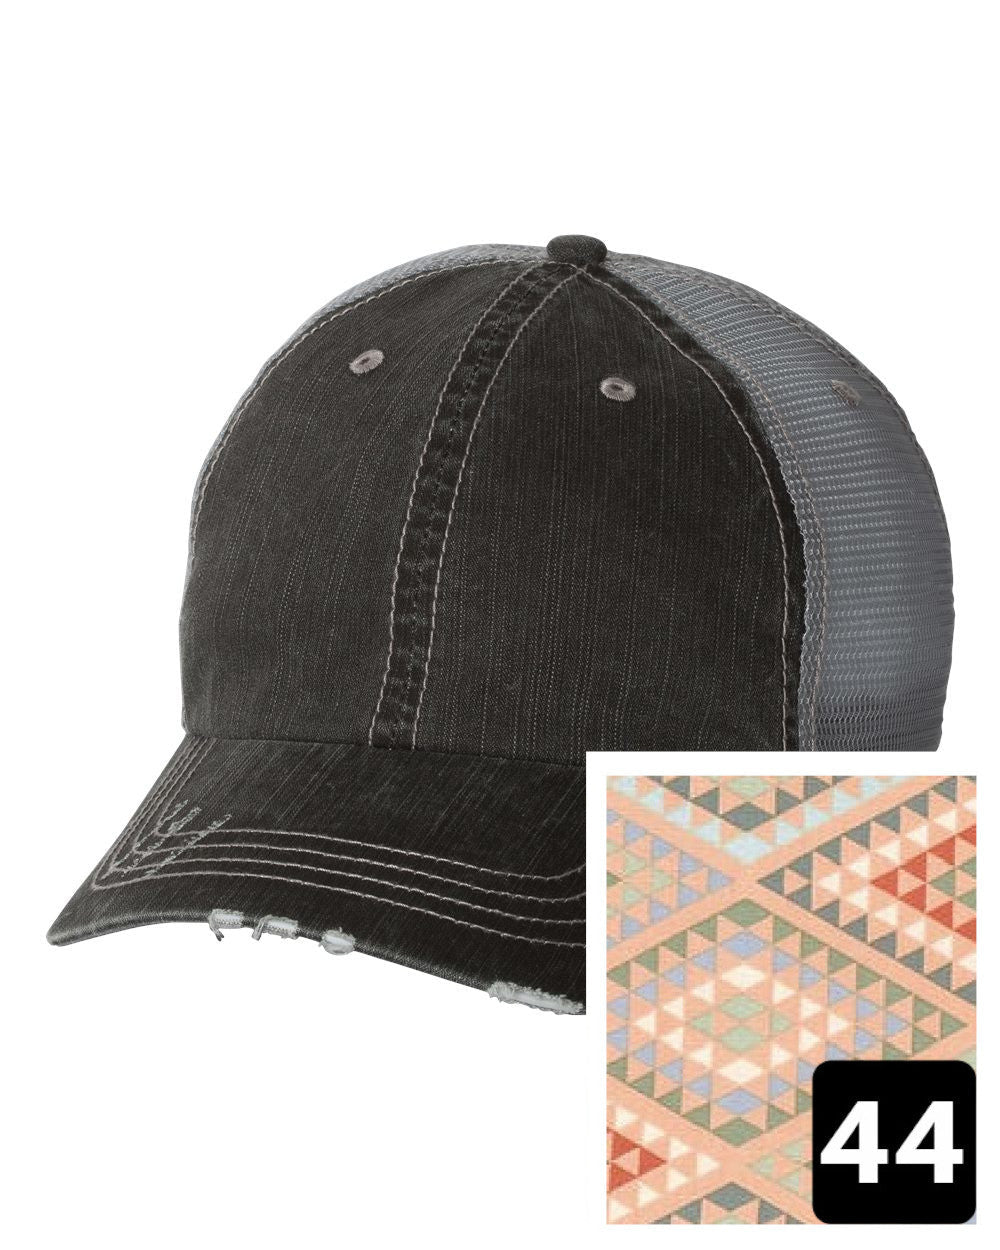 gray distressed trucker hat with navy coral and white chevron fabric state of Oregon